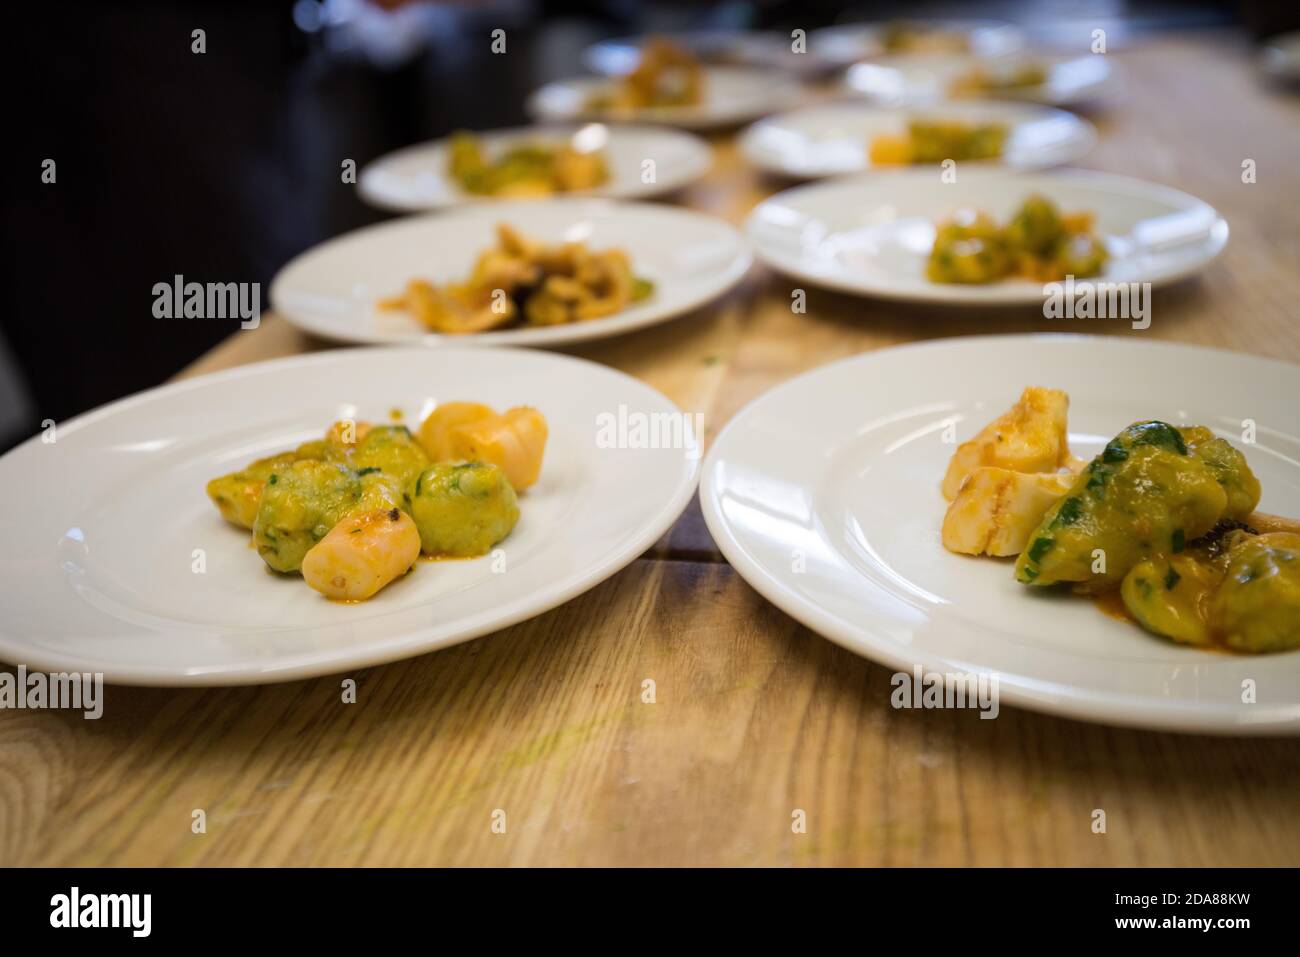 Homemade gnocchi with ramson on small plates as starter dish Stock Photo